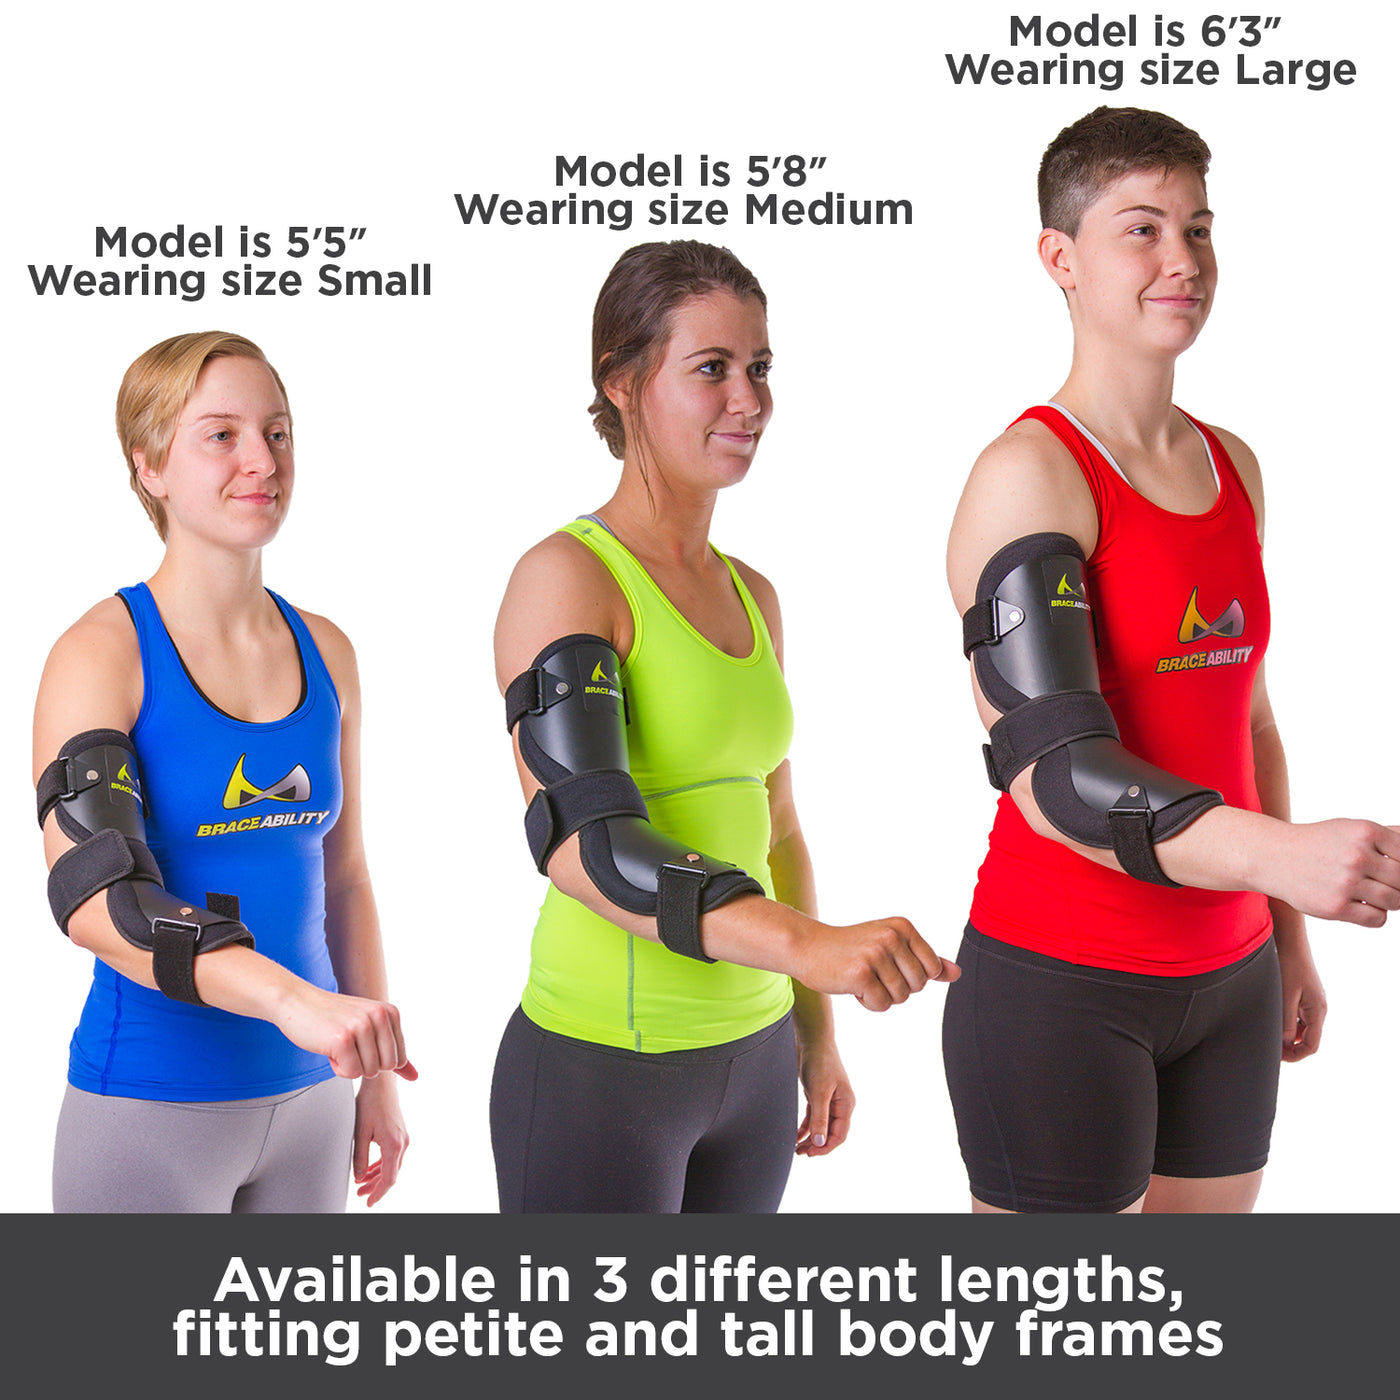 Available in three different lengths, the cubital tunnel elbow brace fits both petite and tall body frames